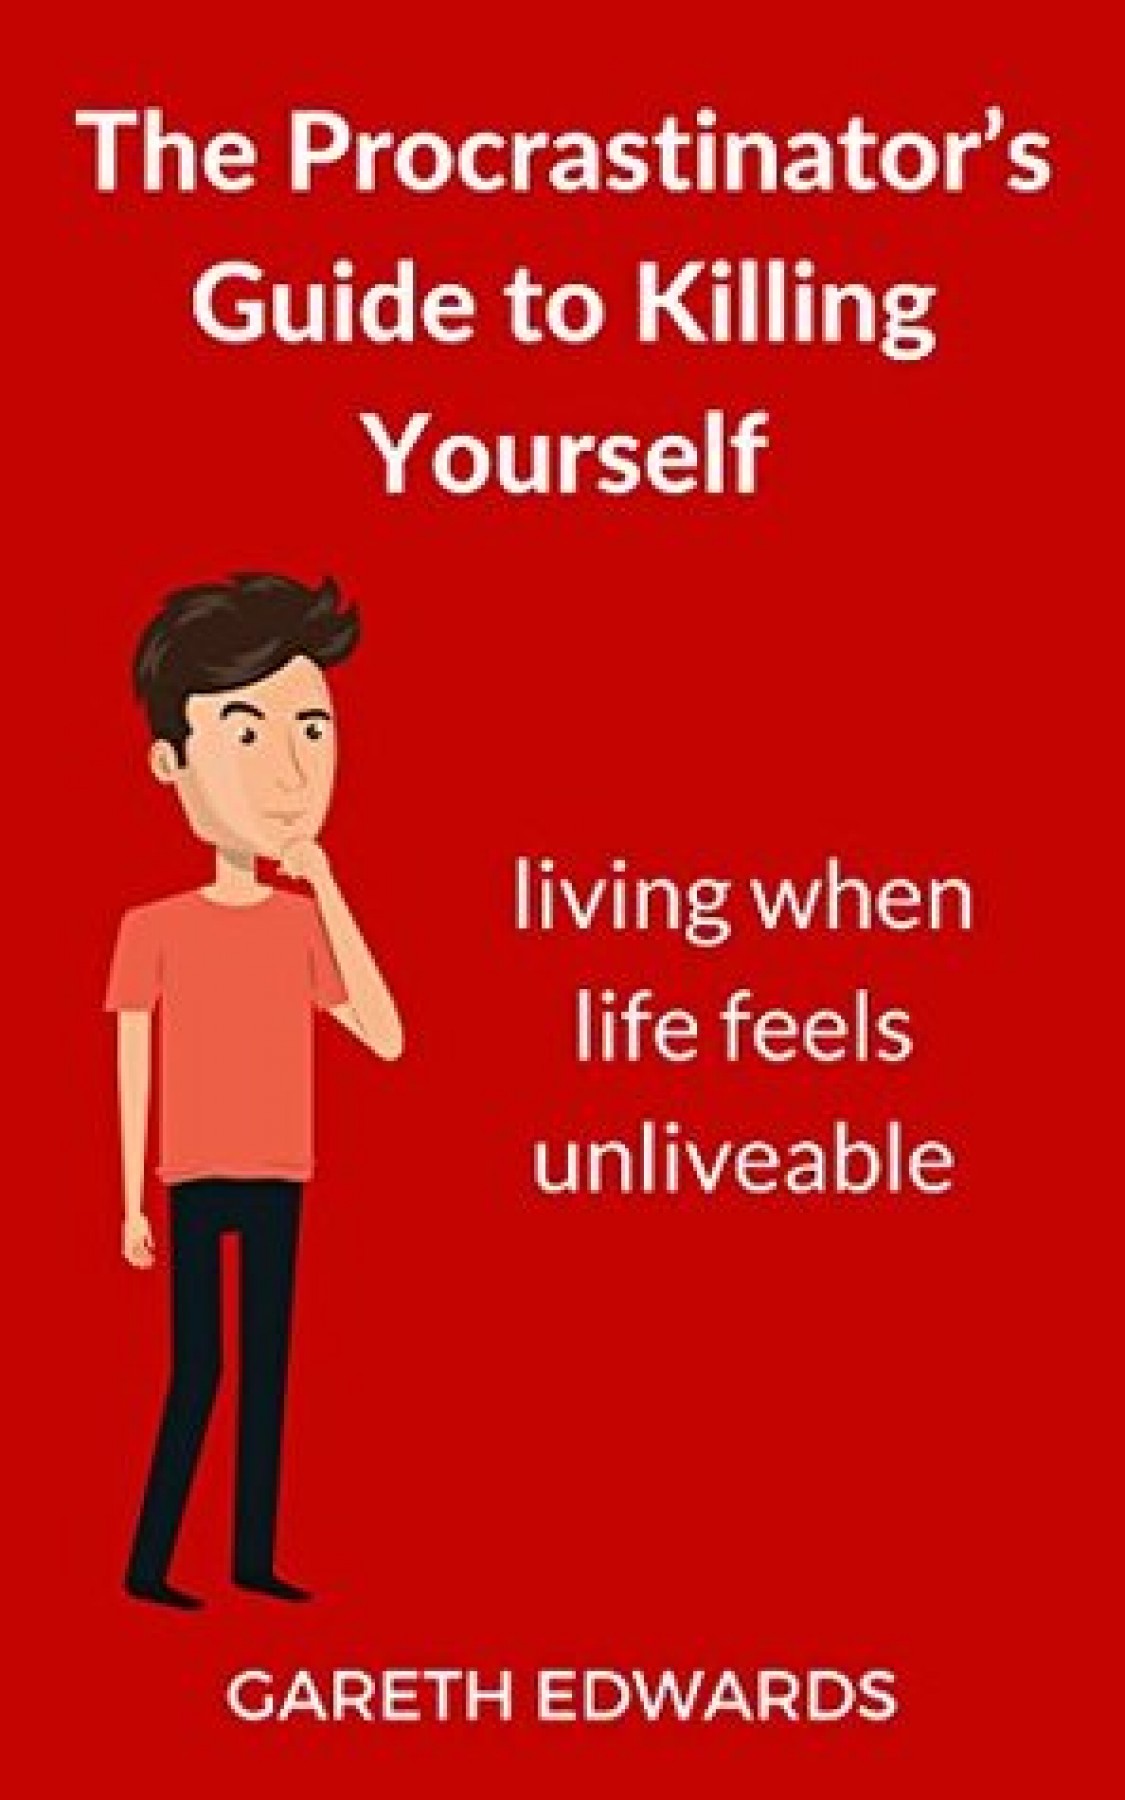 The procrastinator’s guide to killing yourself: Living when life feels unliveable